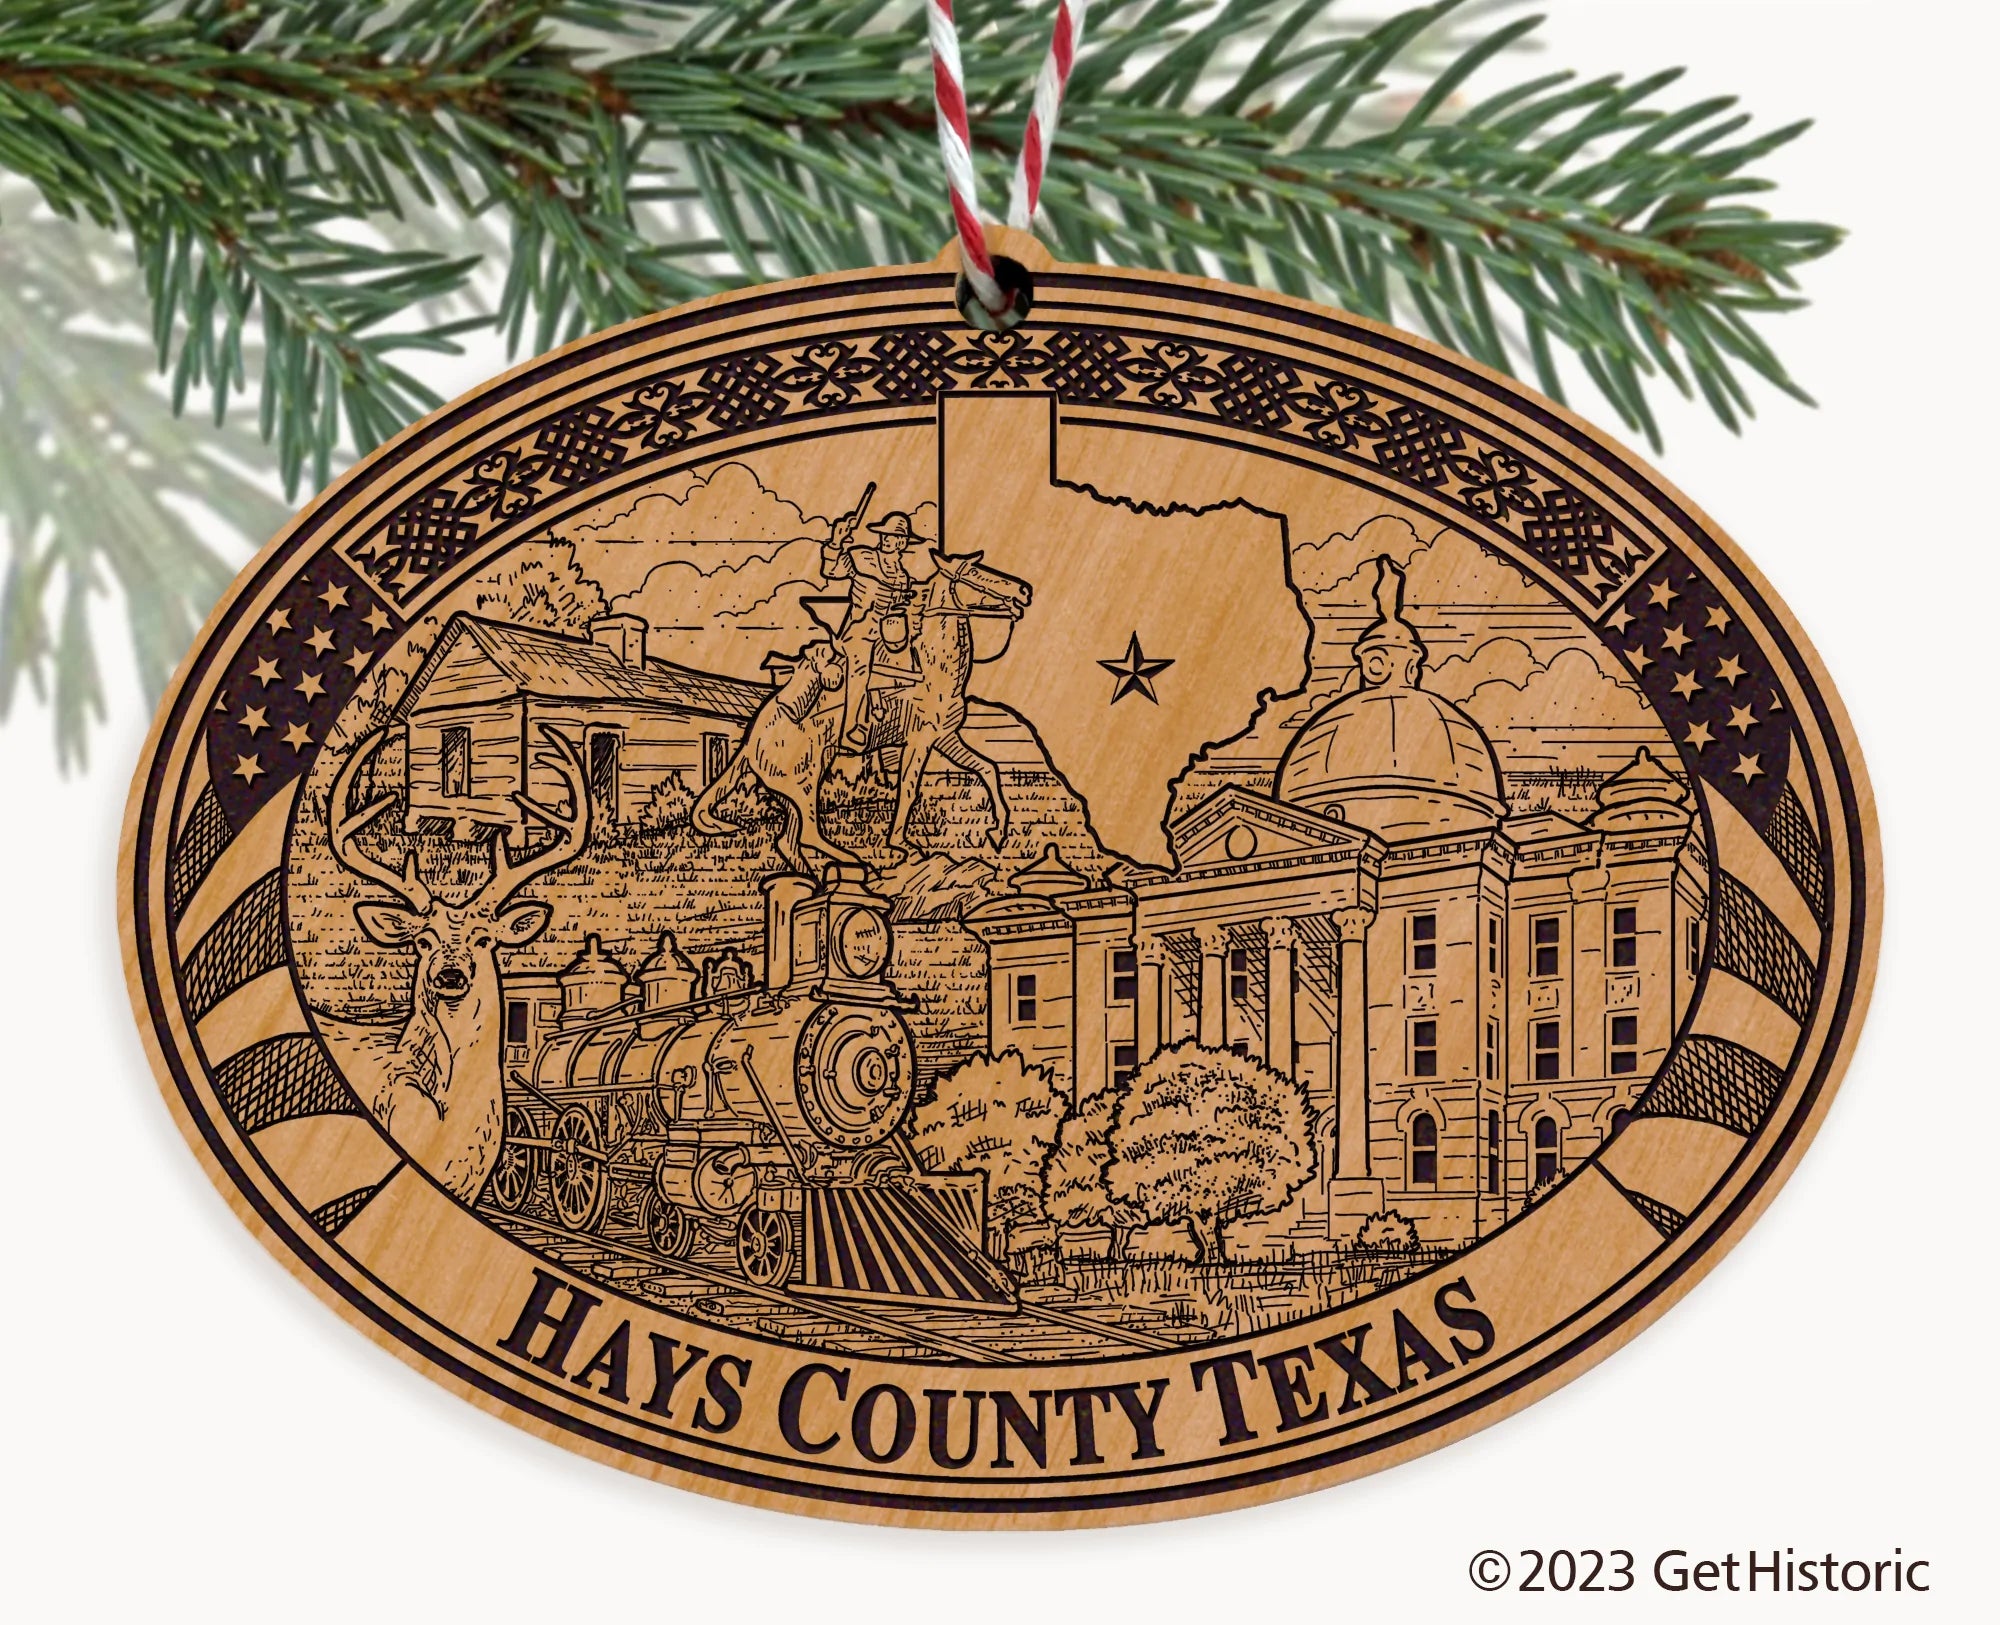 Hays County Texas Engraved Natural Ornament